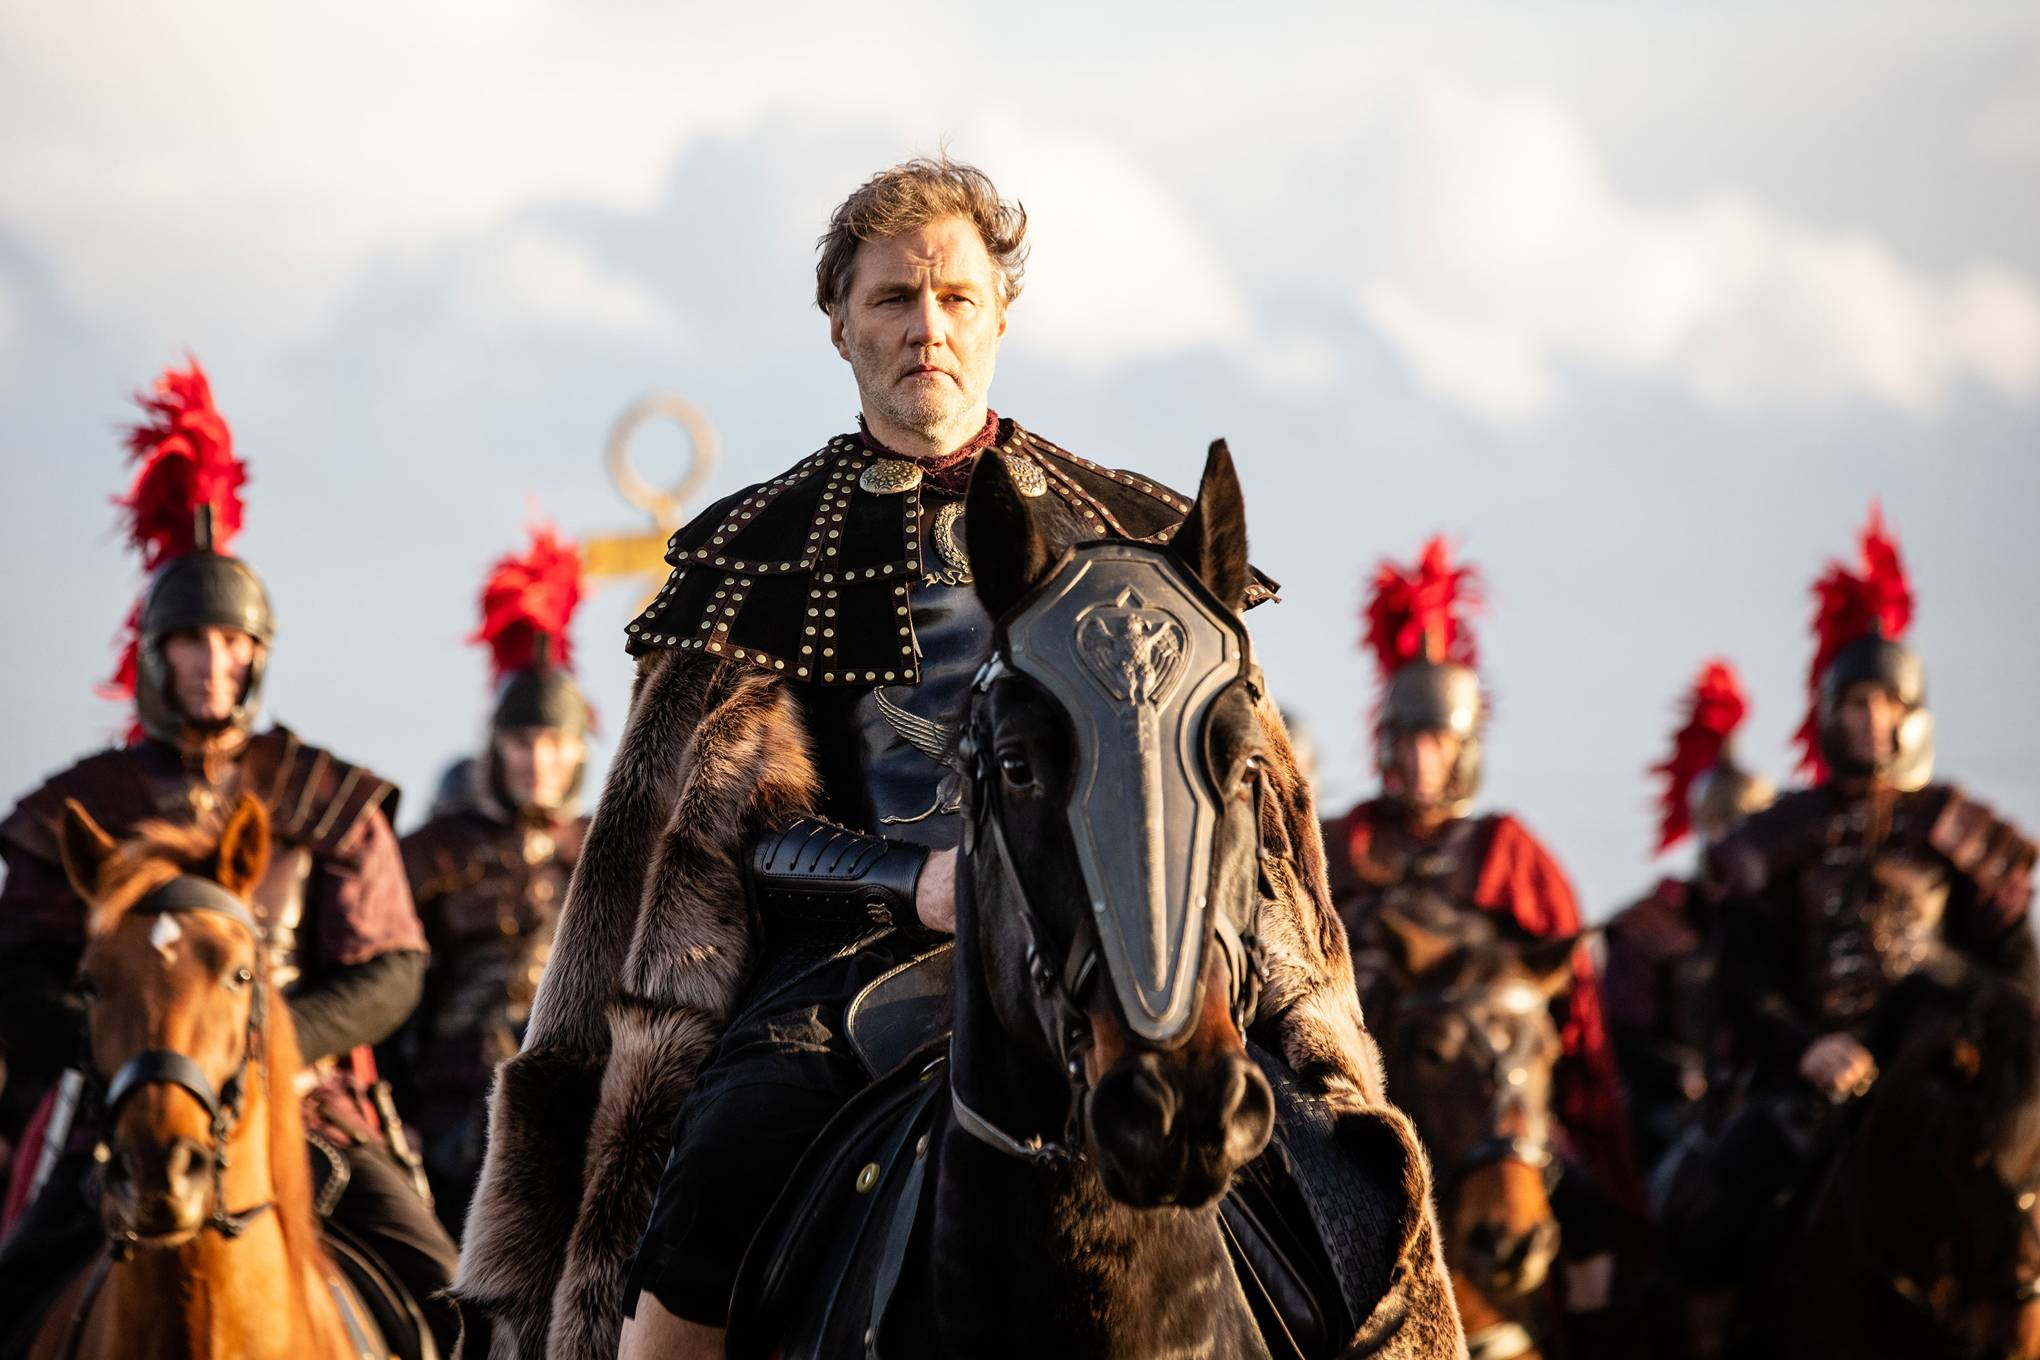 Britannia: 19 series after the Game of Thrones that you can watch to fill the void